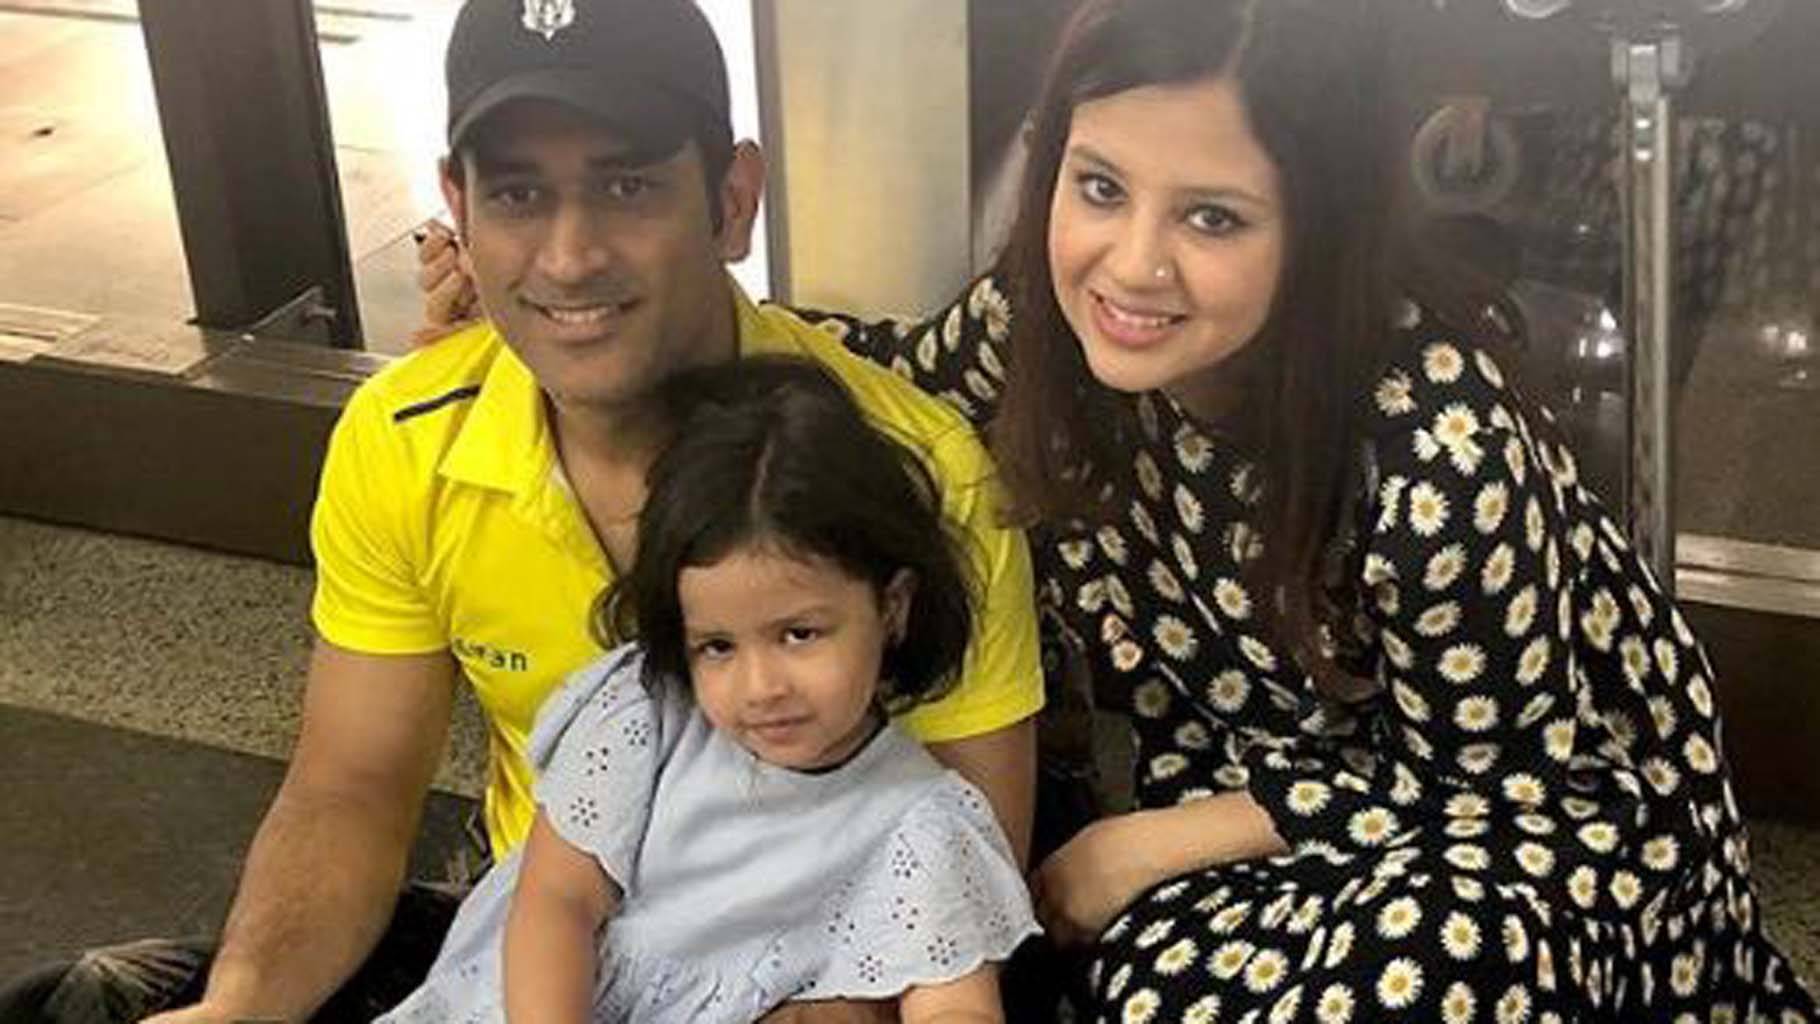 Sakshi Dhoni pens down emotional poem for MS Dhoni after CSK miss out on IPL '20 playoffs